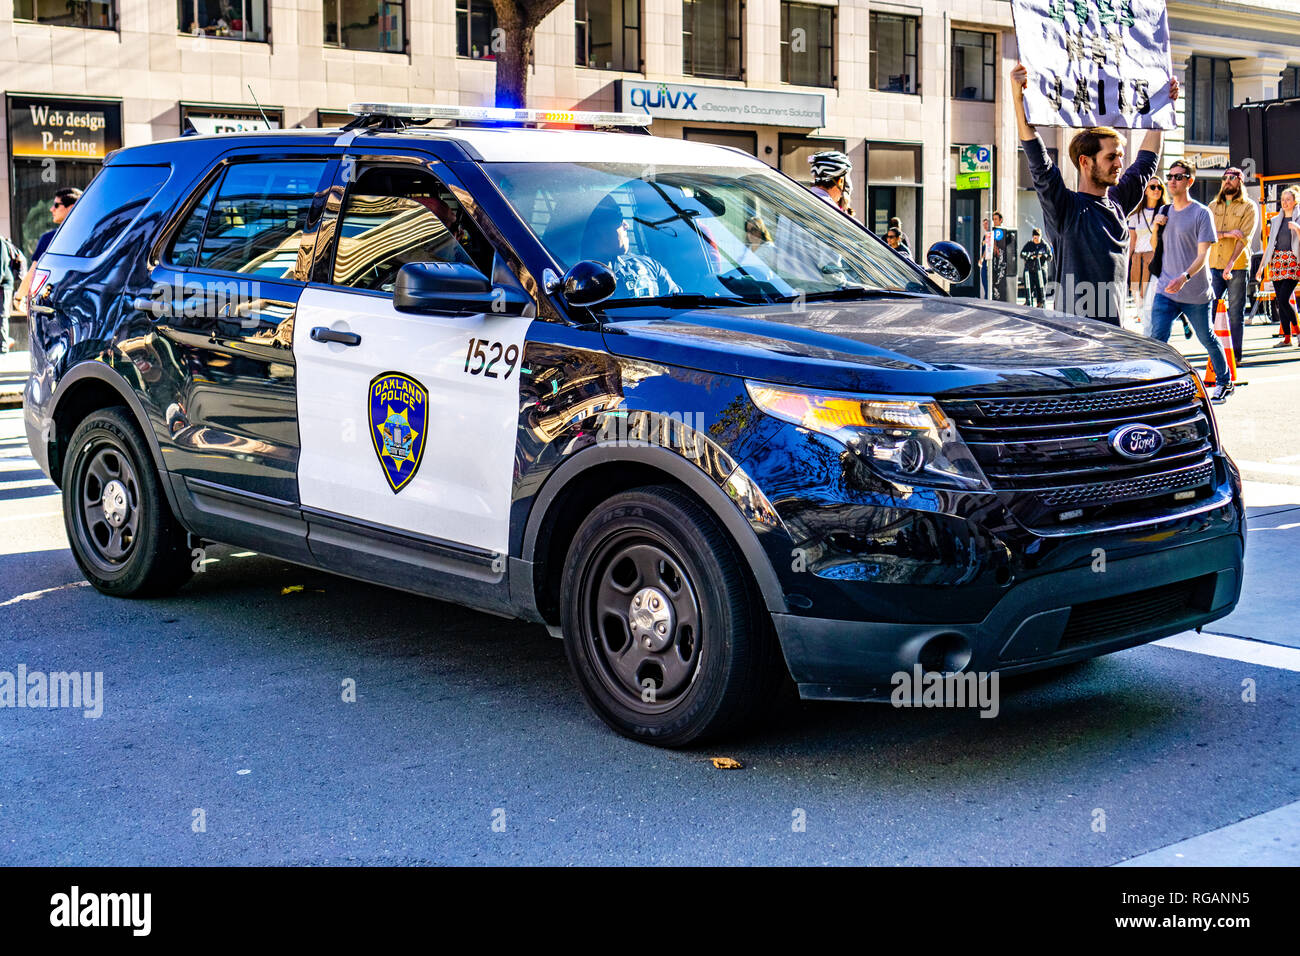 January 27, 2019 Oakland / CA / USA - Oakland Police Department vehicle parked on the street Stock Photo